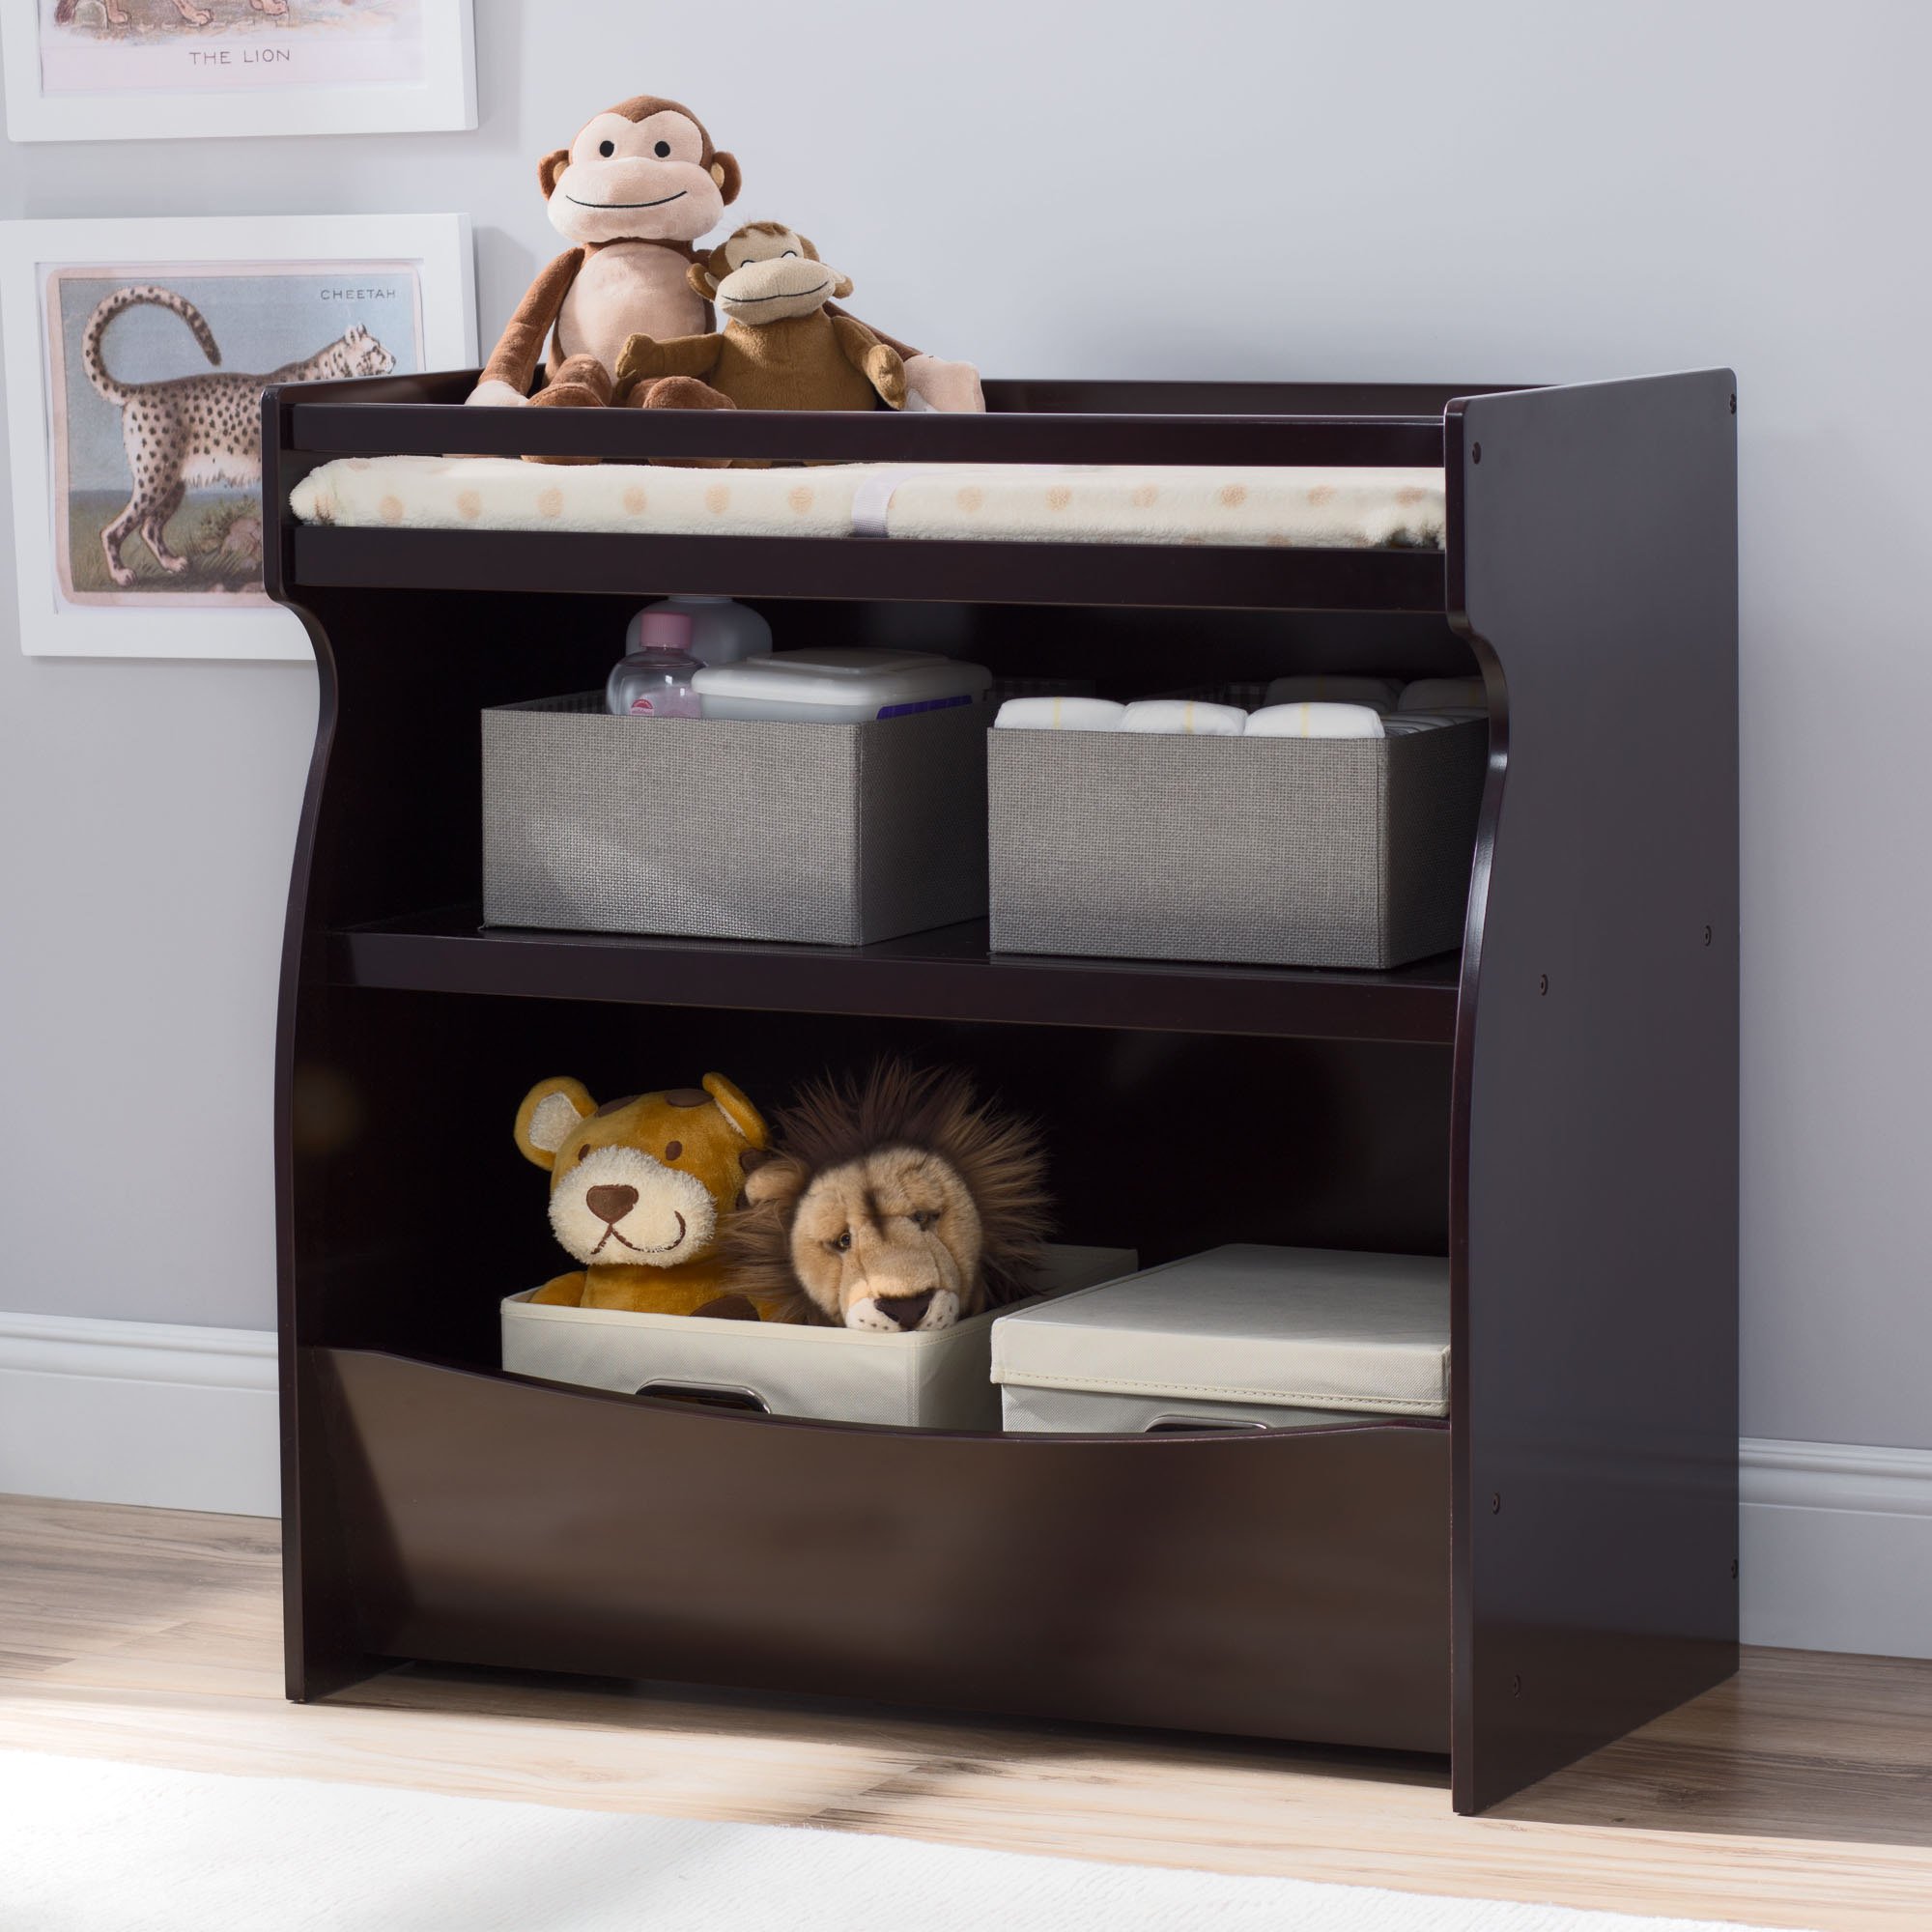 Delta Children 2-in-1 Changing Table and Storage Unit with Changing Pad, Dark Chocolate